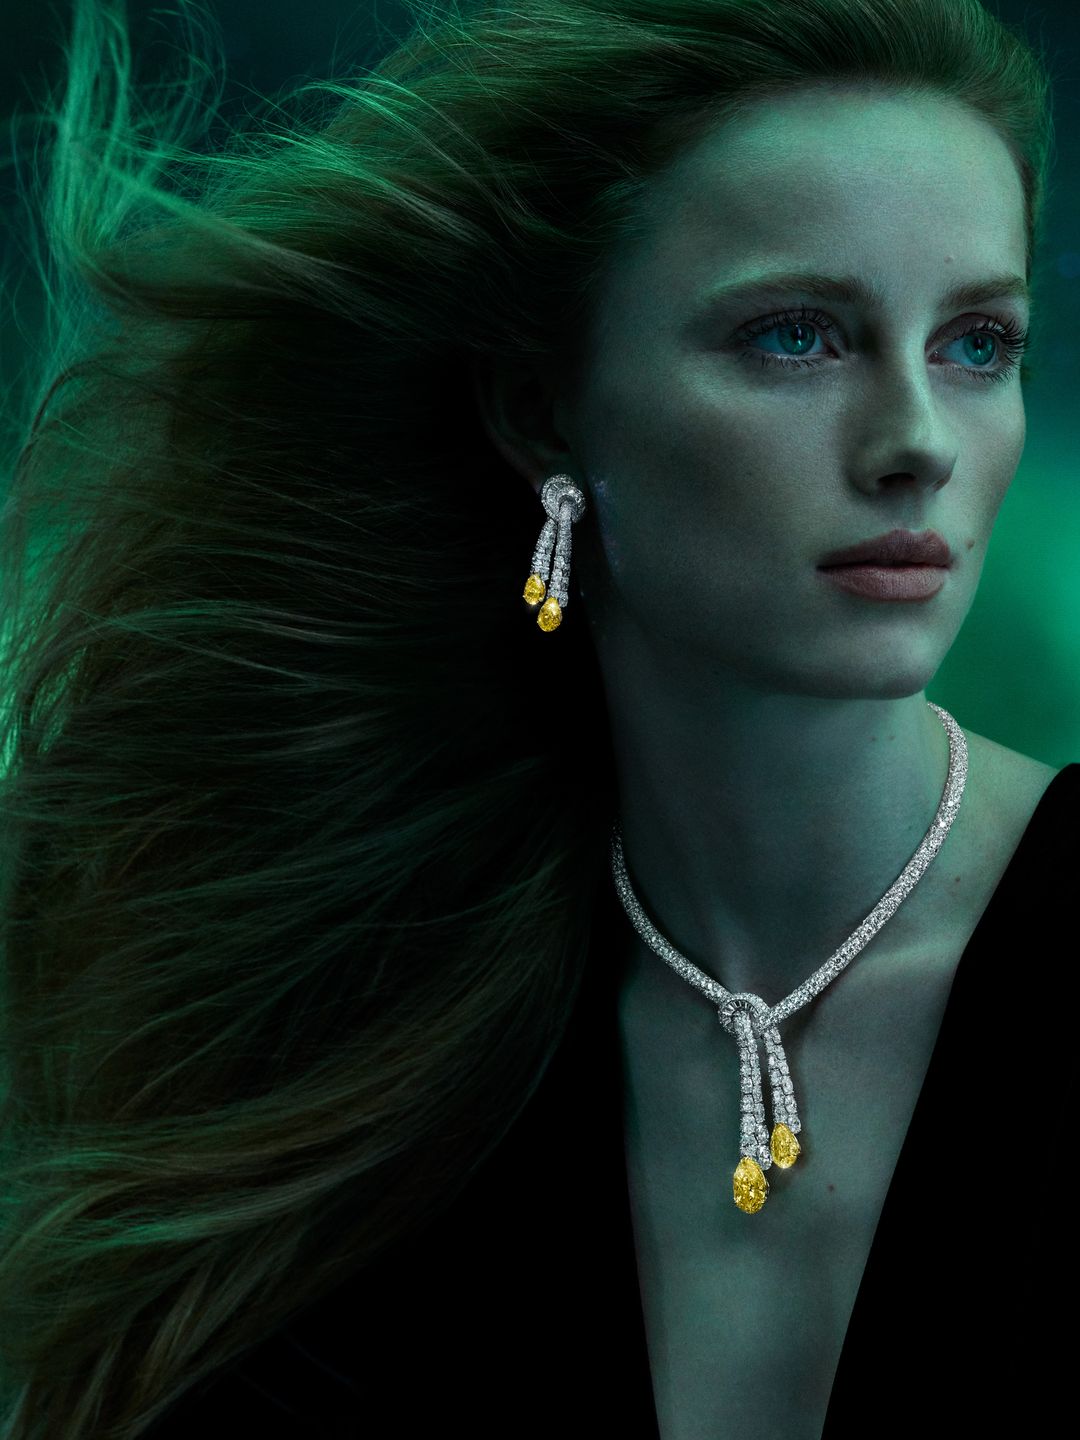 A model looks into the distance wearing jewels from Graff's latest campaign 